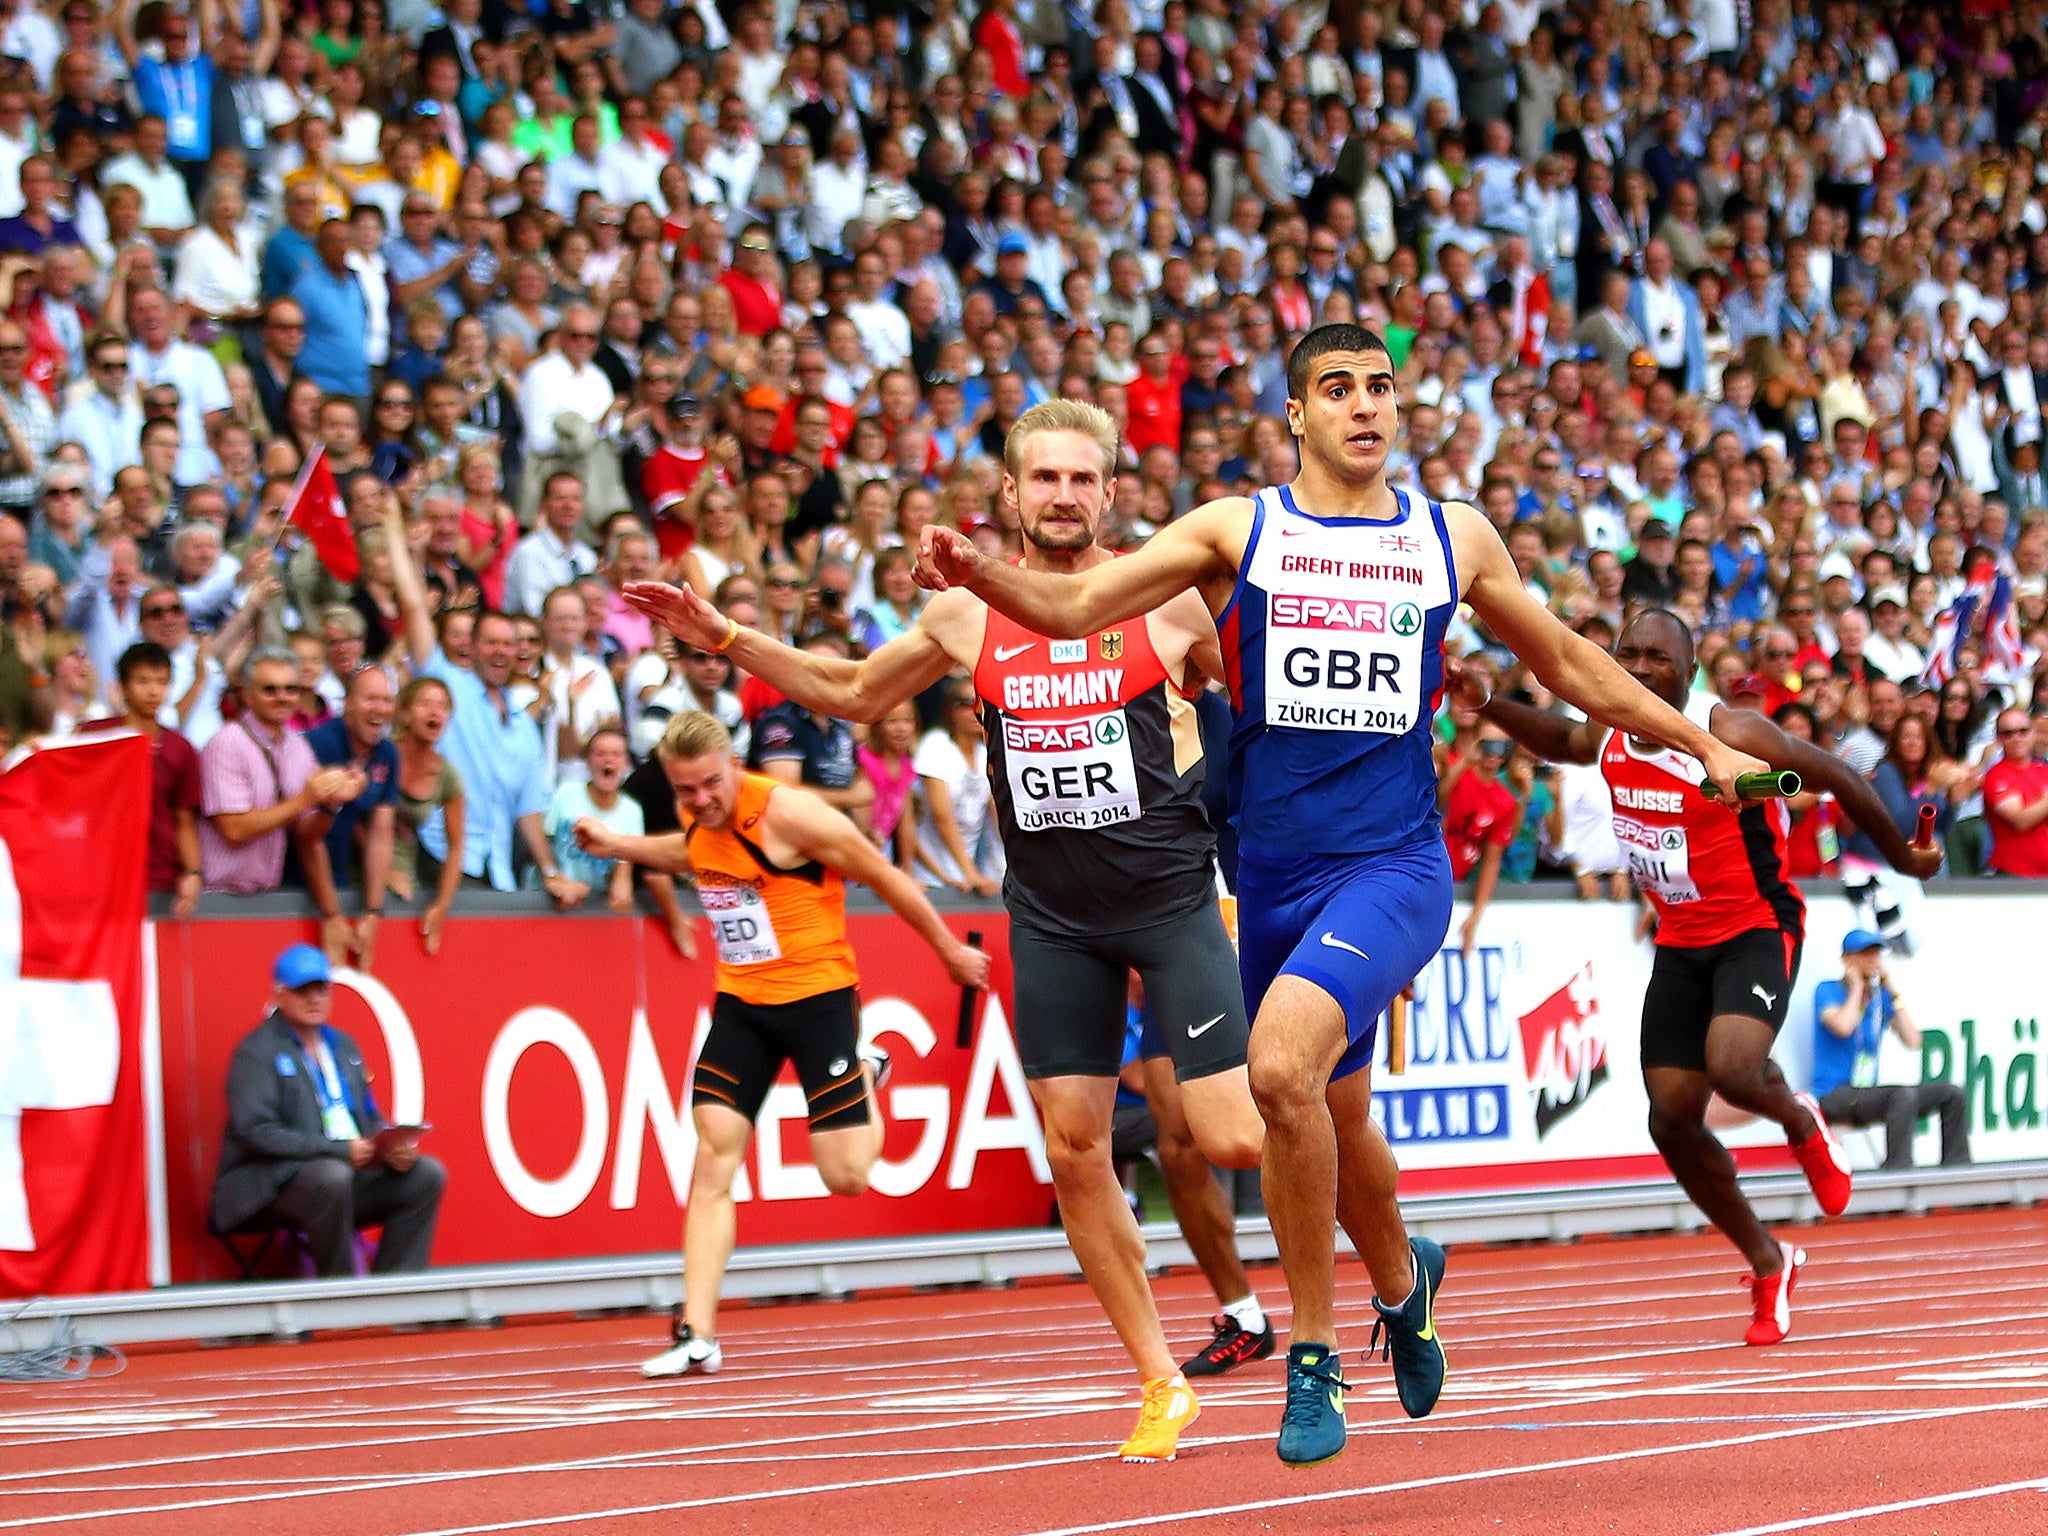 Adam Gemili of Great Britain and Northern Ireland crosses the finish line to win gold in the Men's 4x100 metres relay final